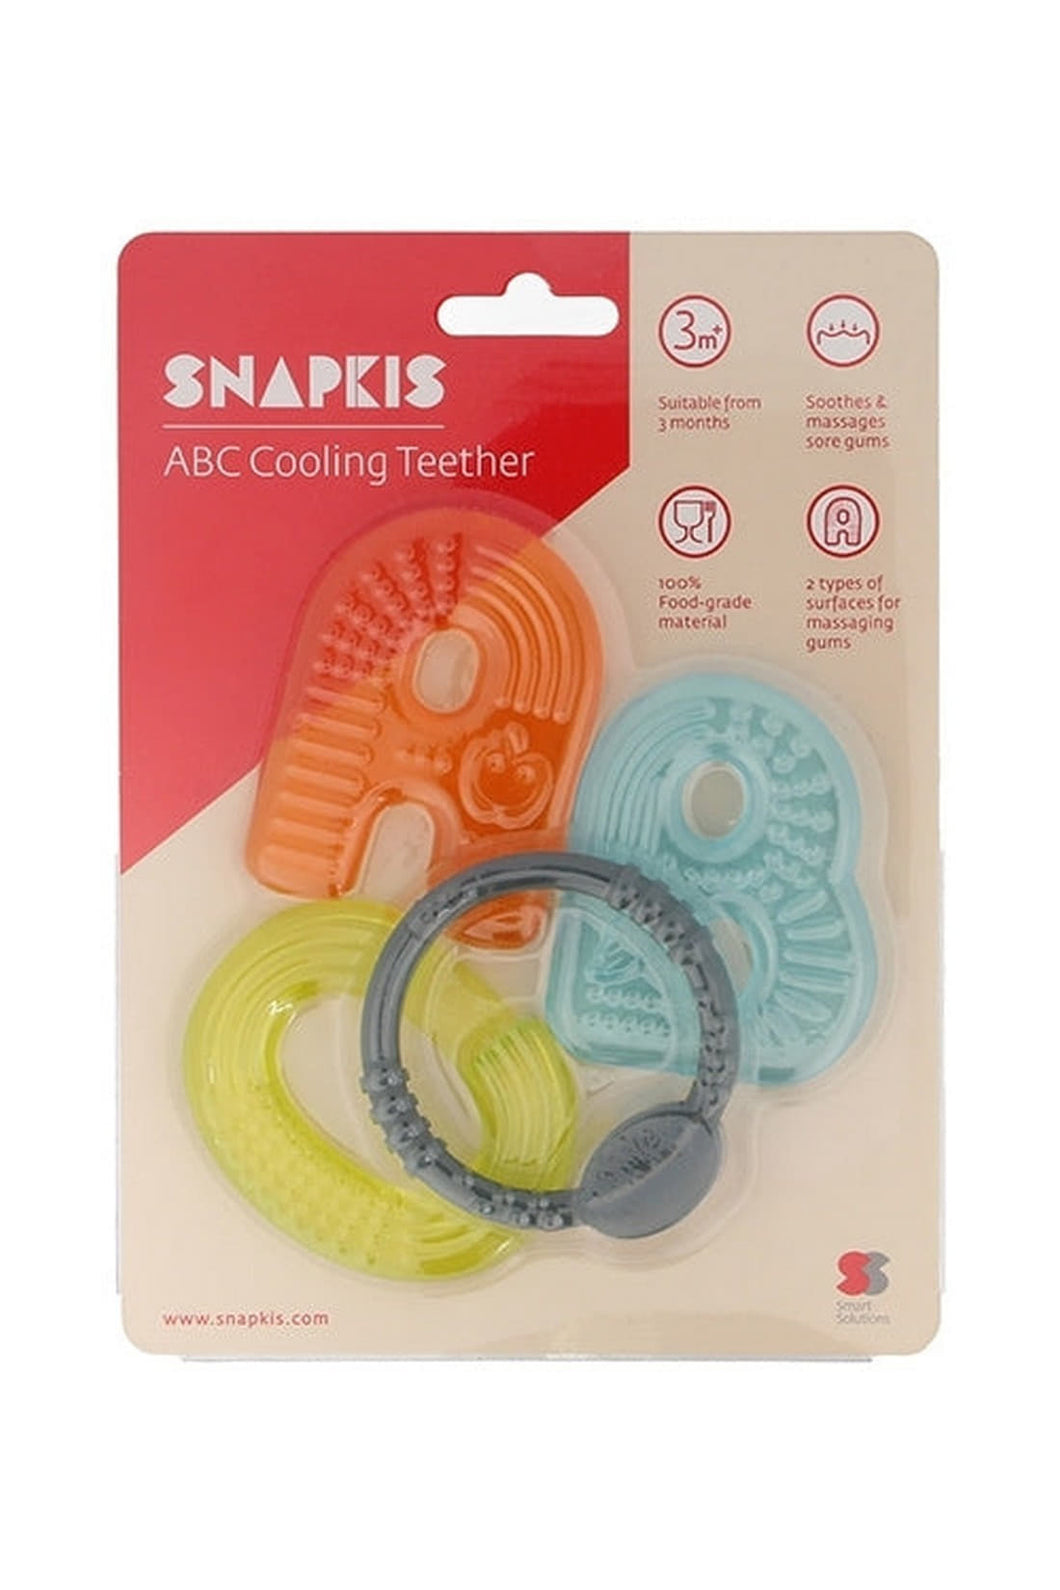 Snapkis Abc Cooling Teether 1